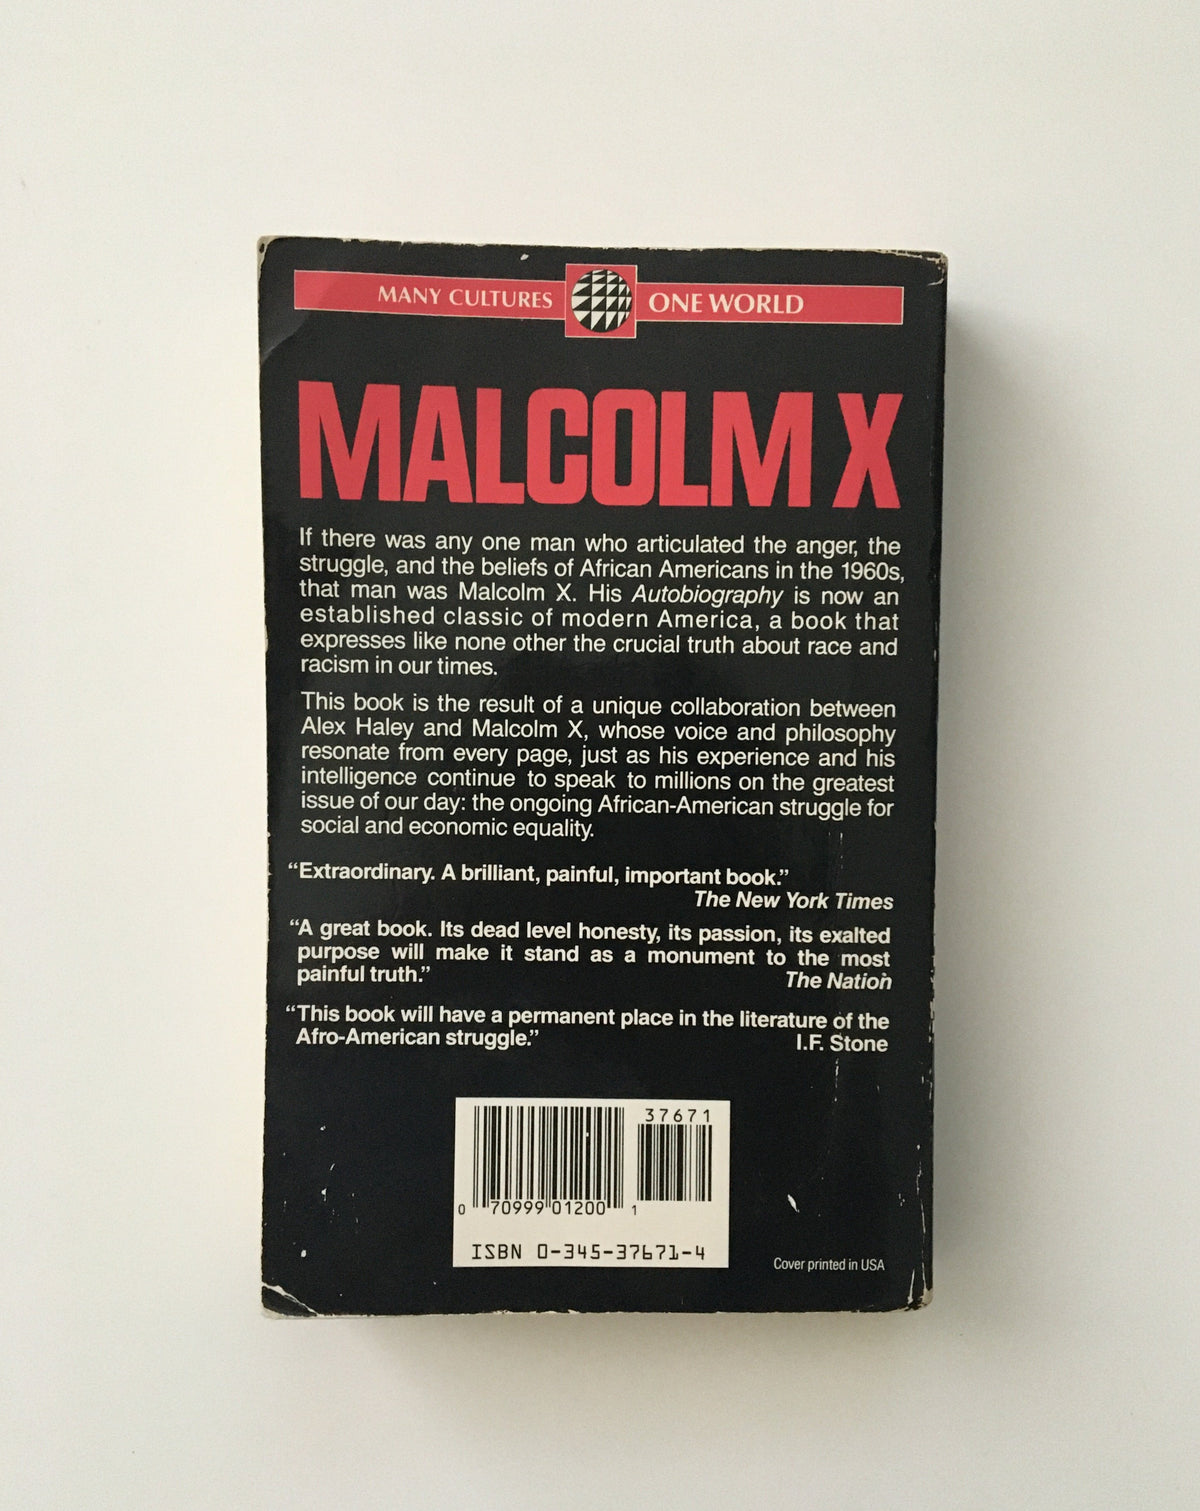 The Autobiography of Malcolm X co-written with Alex Haley, book, ten dollar books, Ten Dollar Books